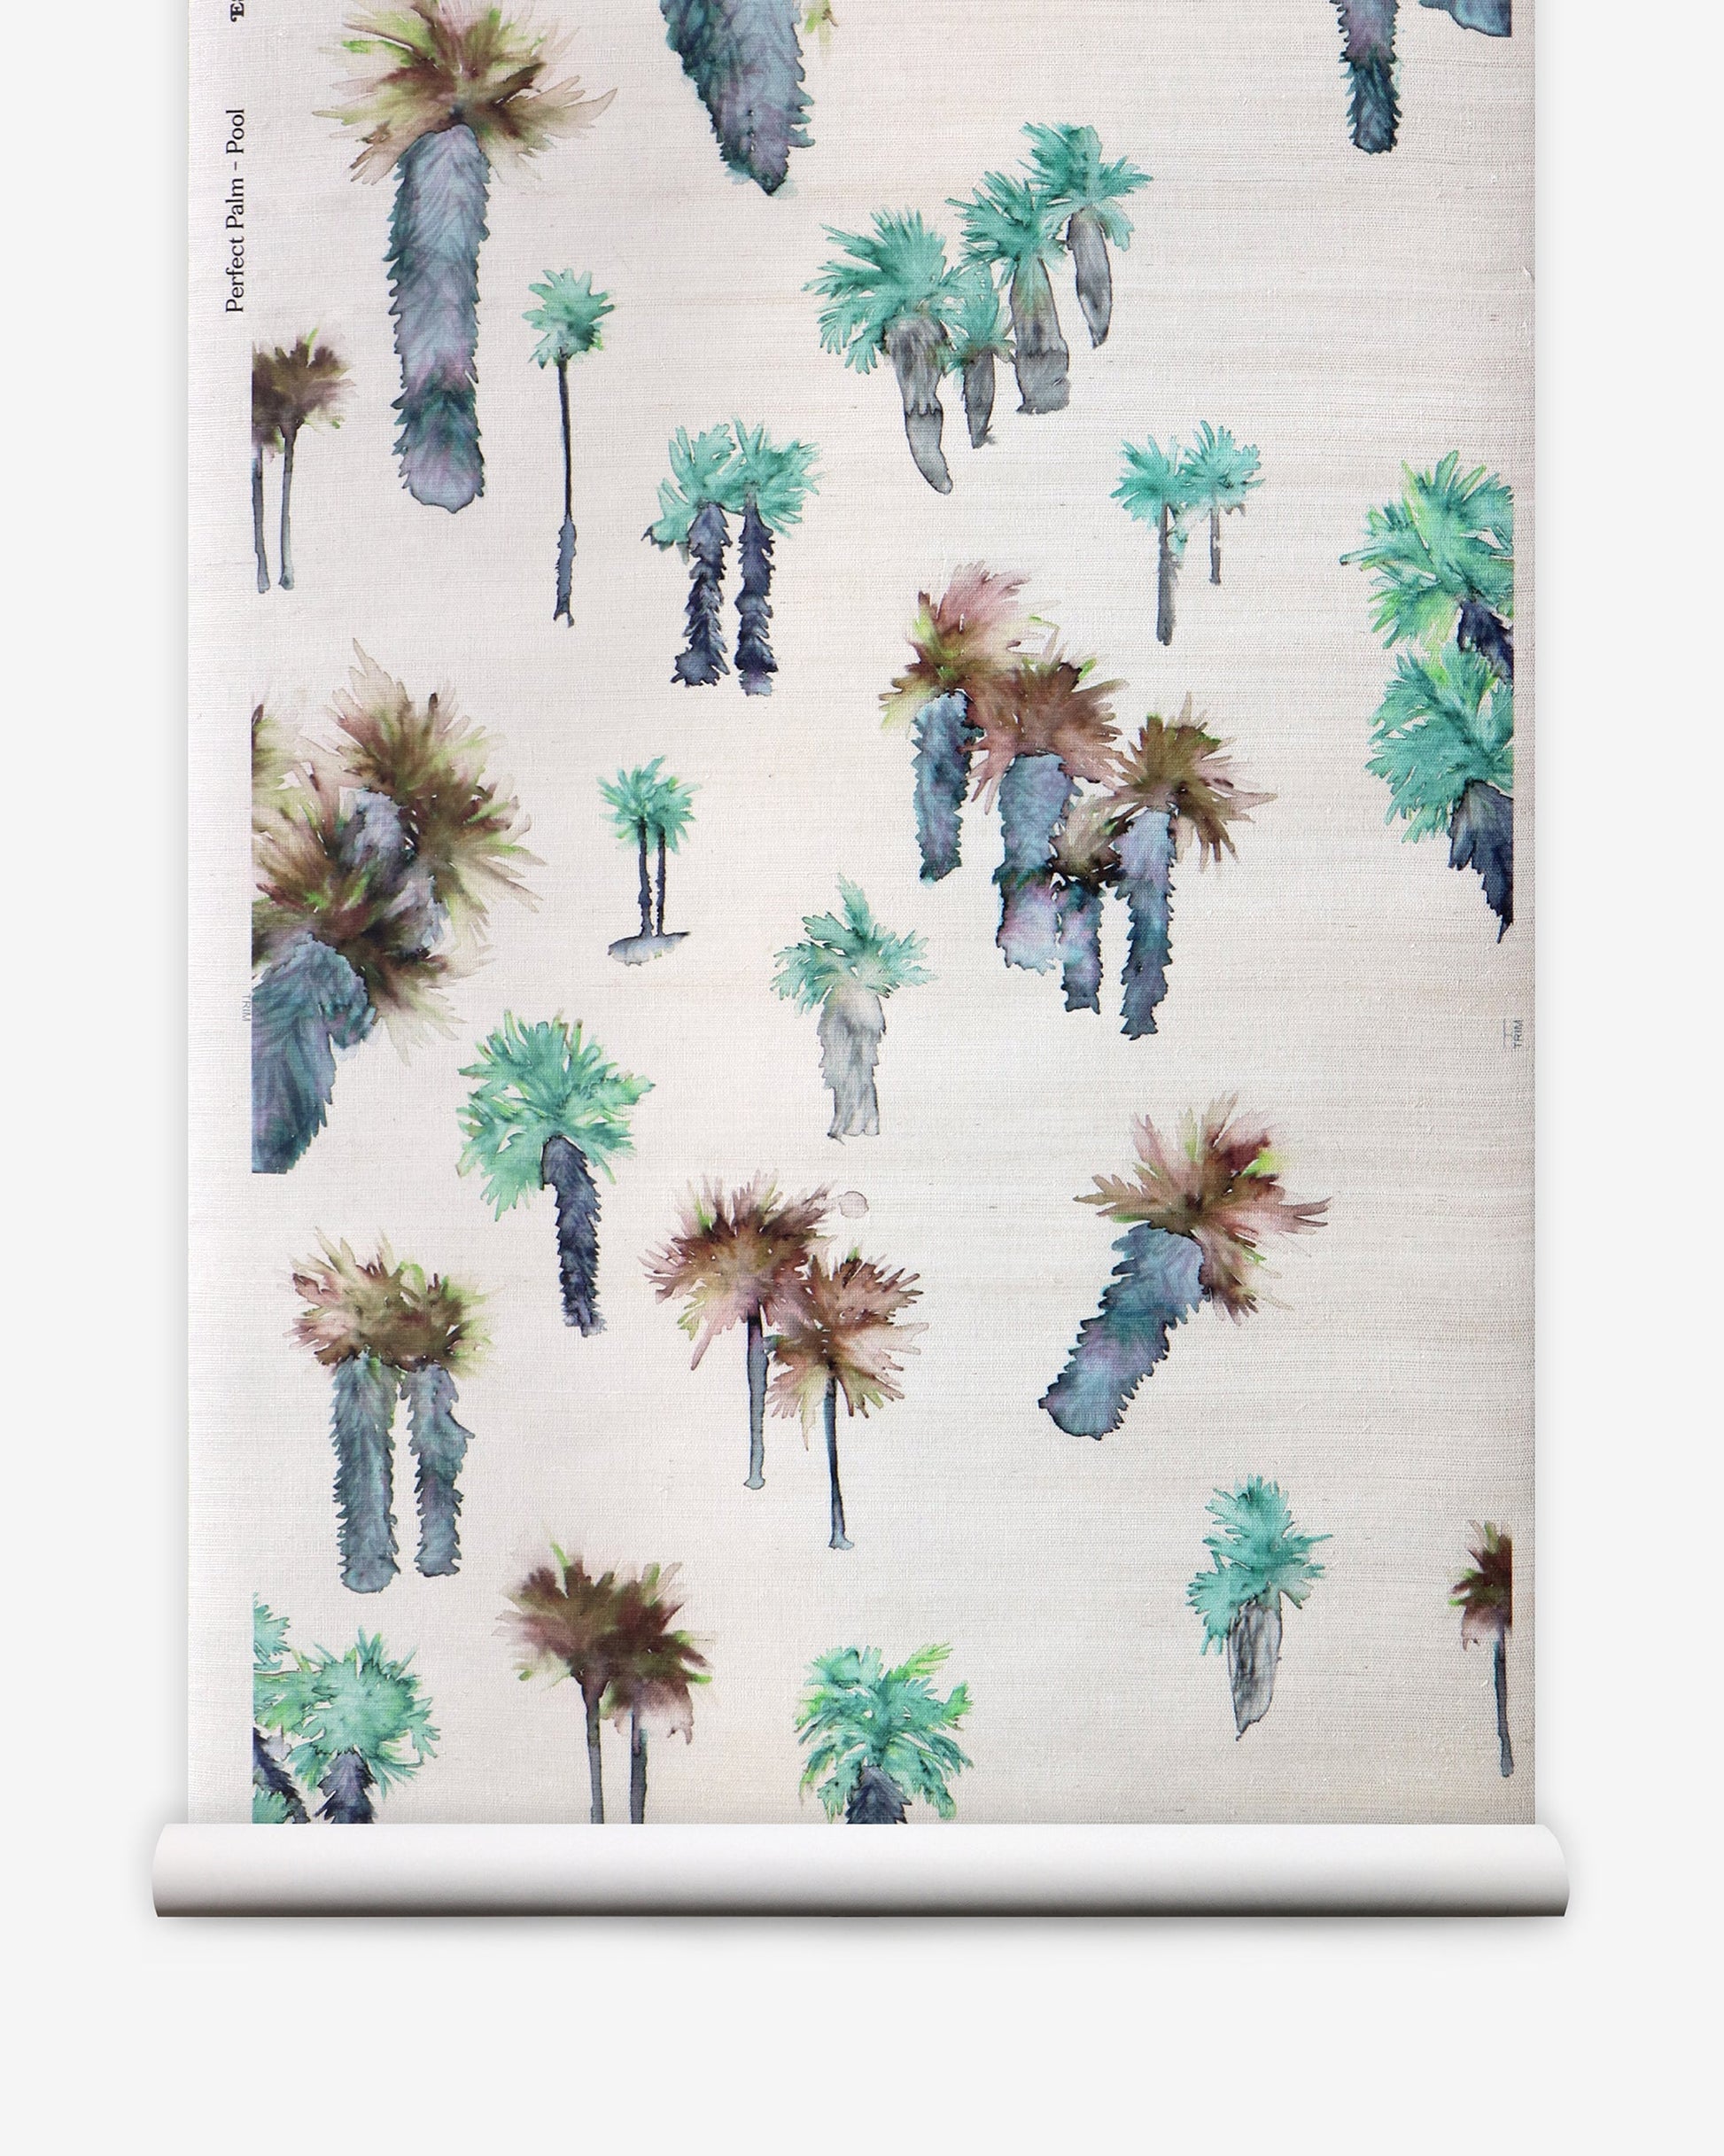 A roll of Perfect Palm Grasscloth Pool wallpaper featuring palm trees in a watercolor style